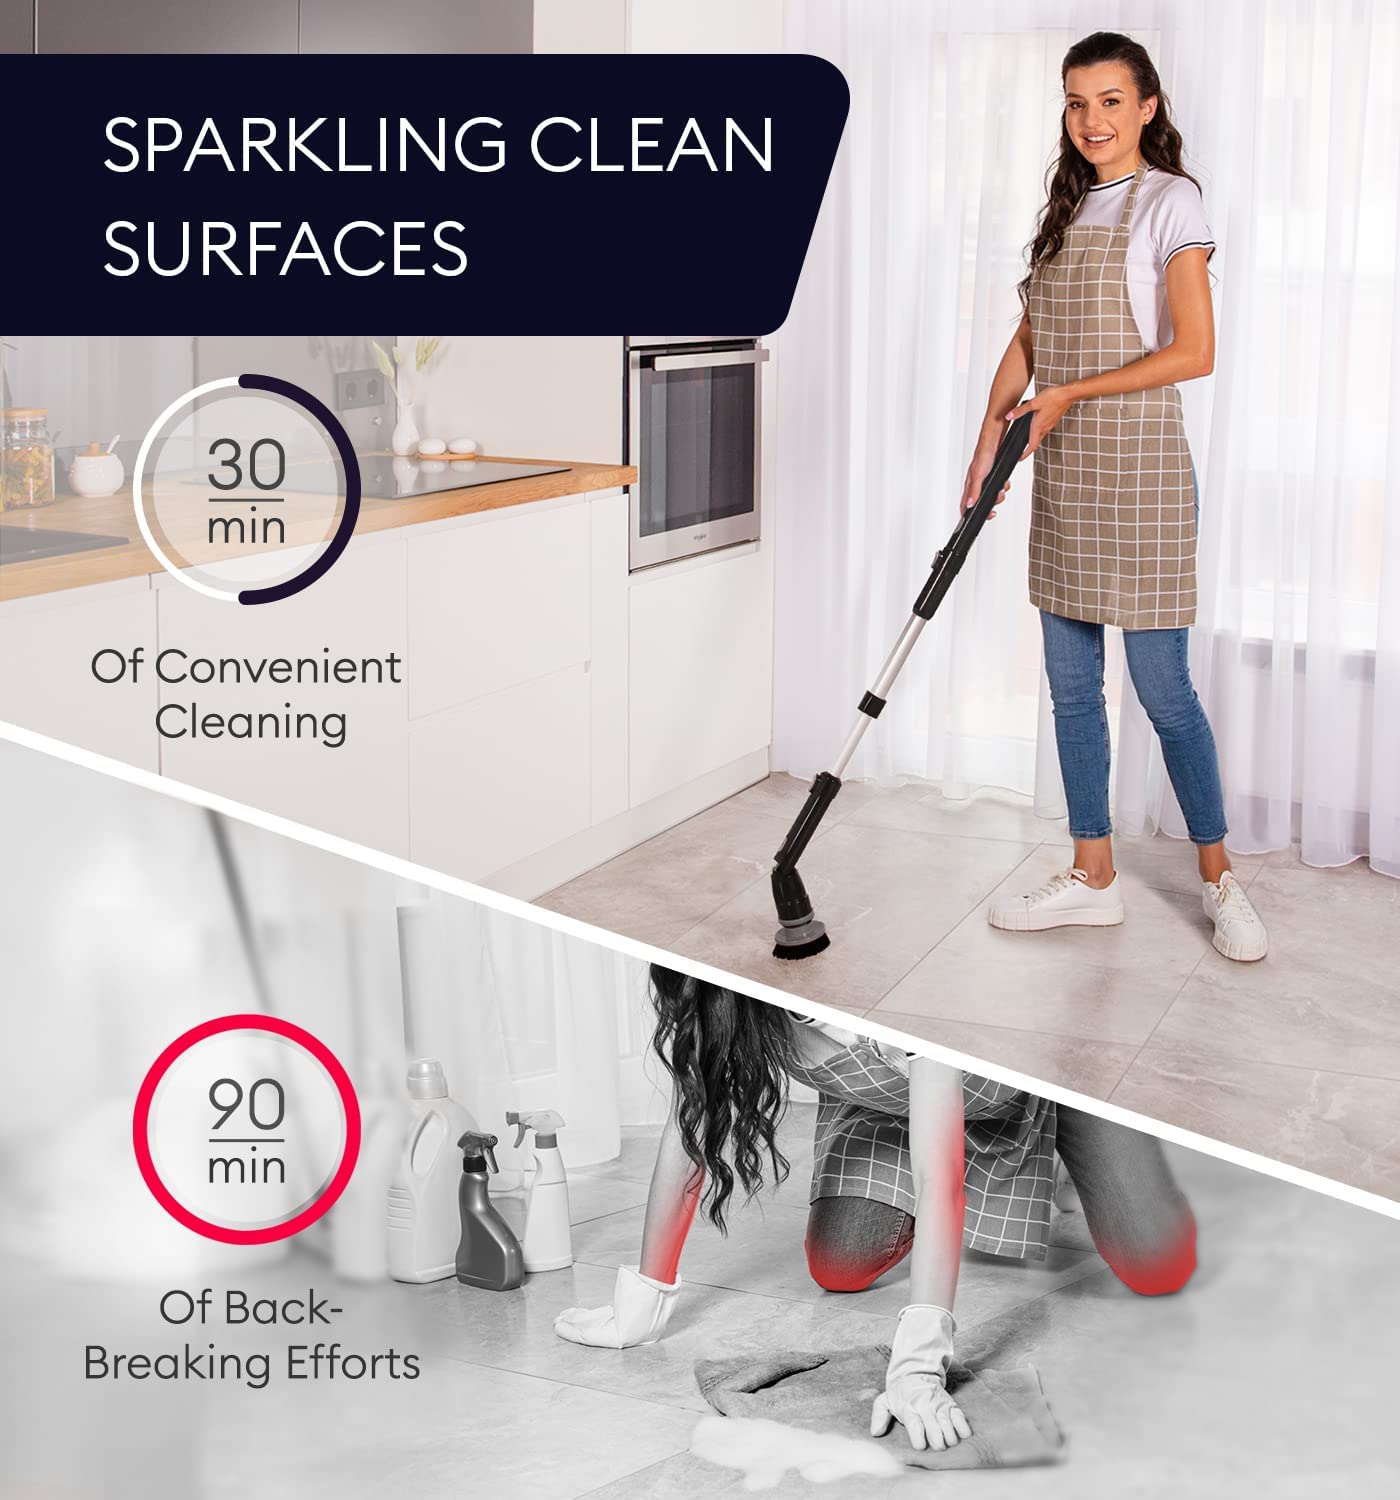 Cordless Electric Spin Powerful Scrubber 360 Rotating Brush For Cleaning Tile Floor Shower Tub